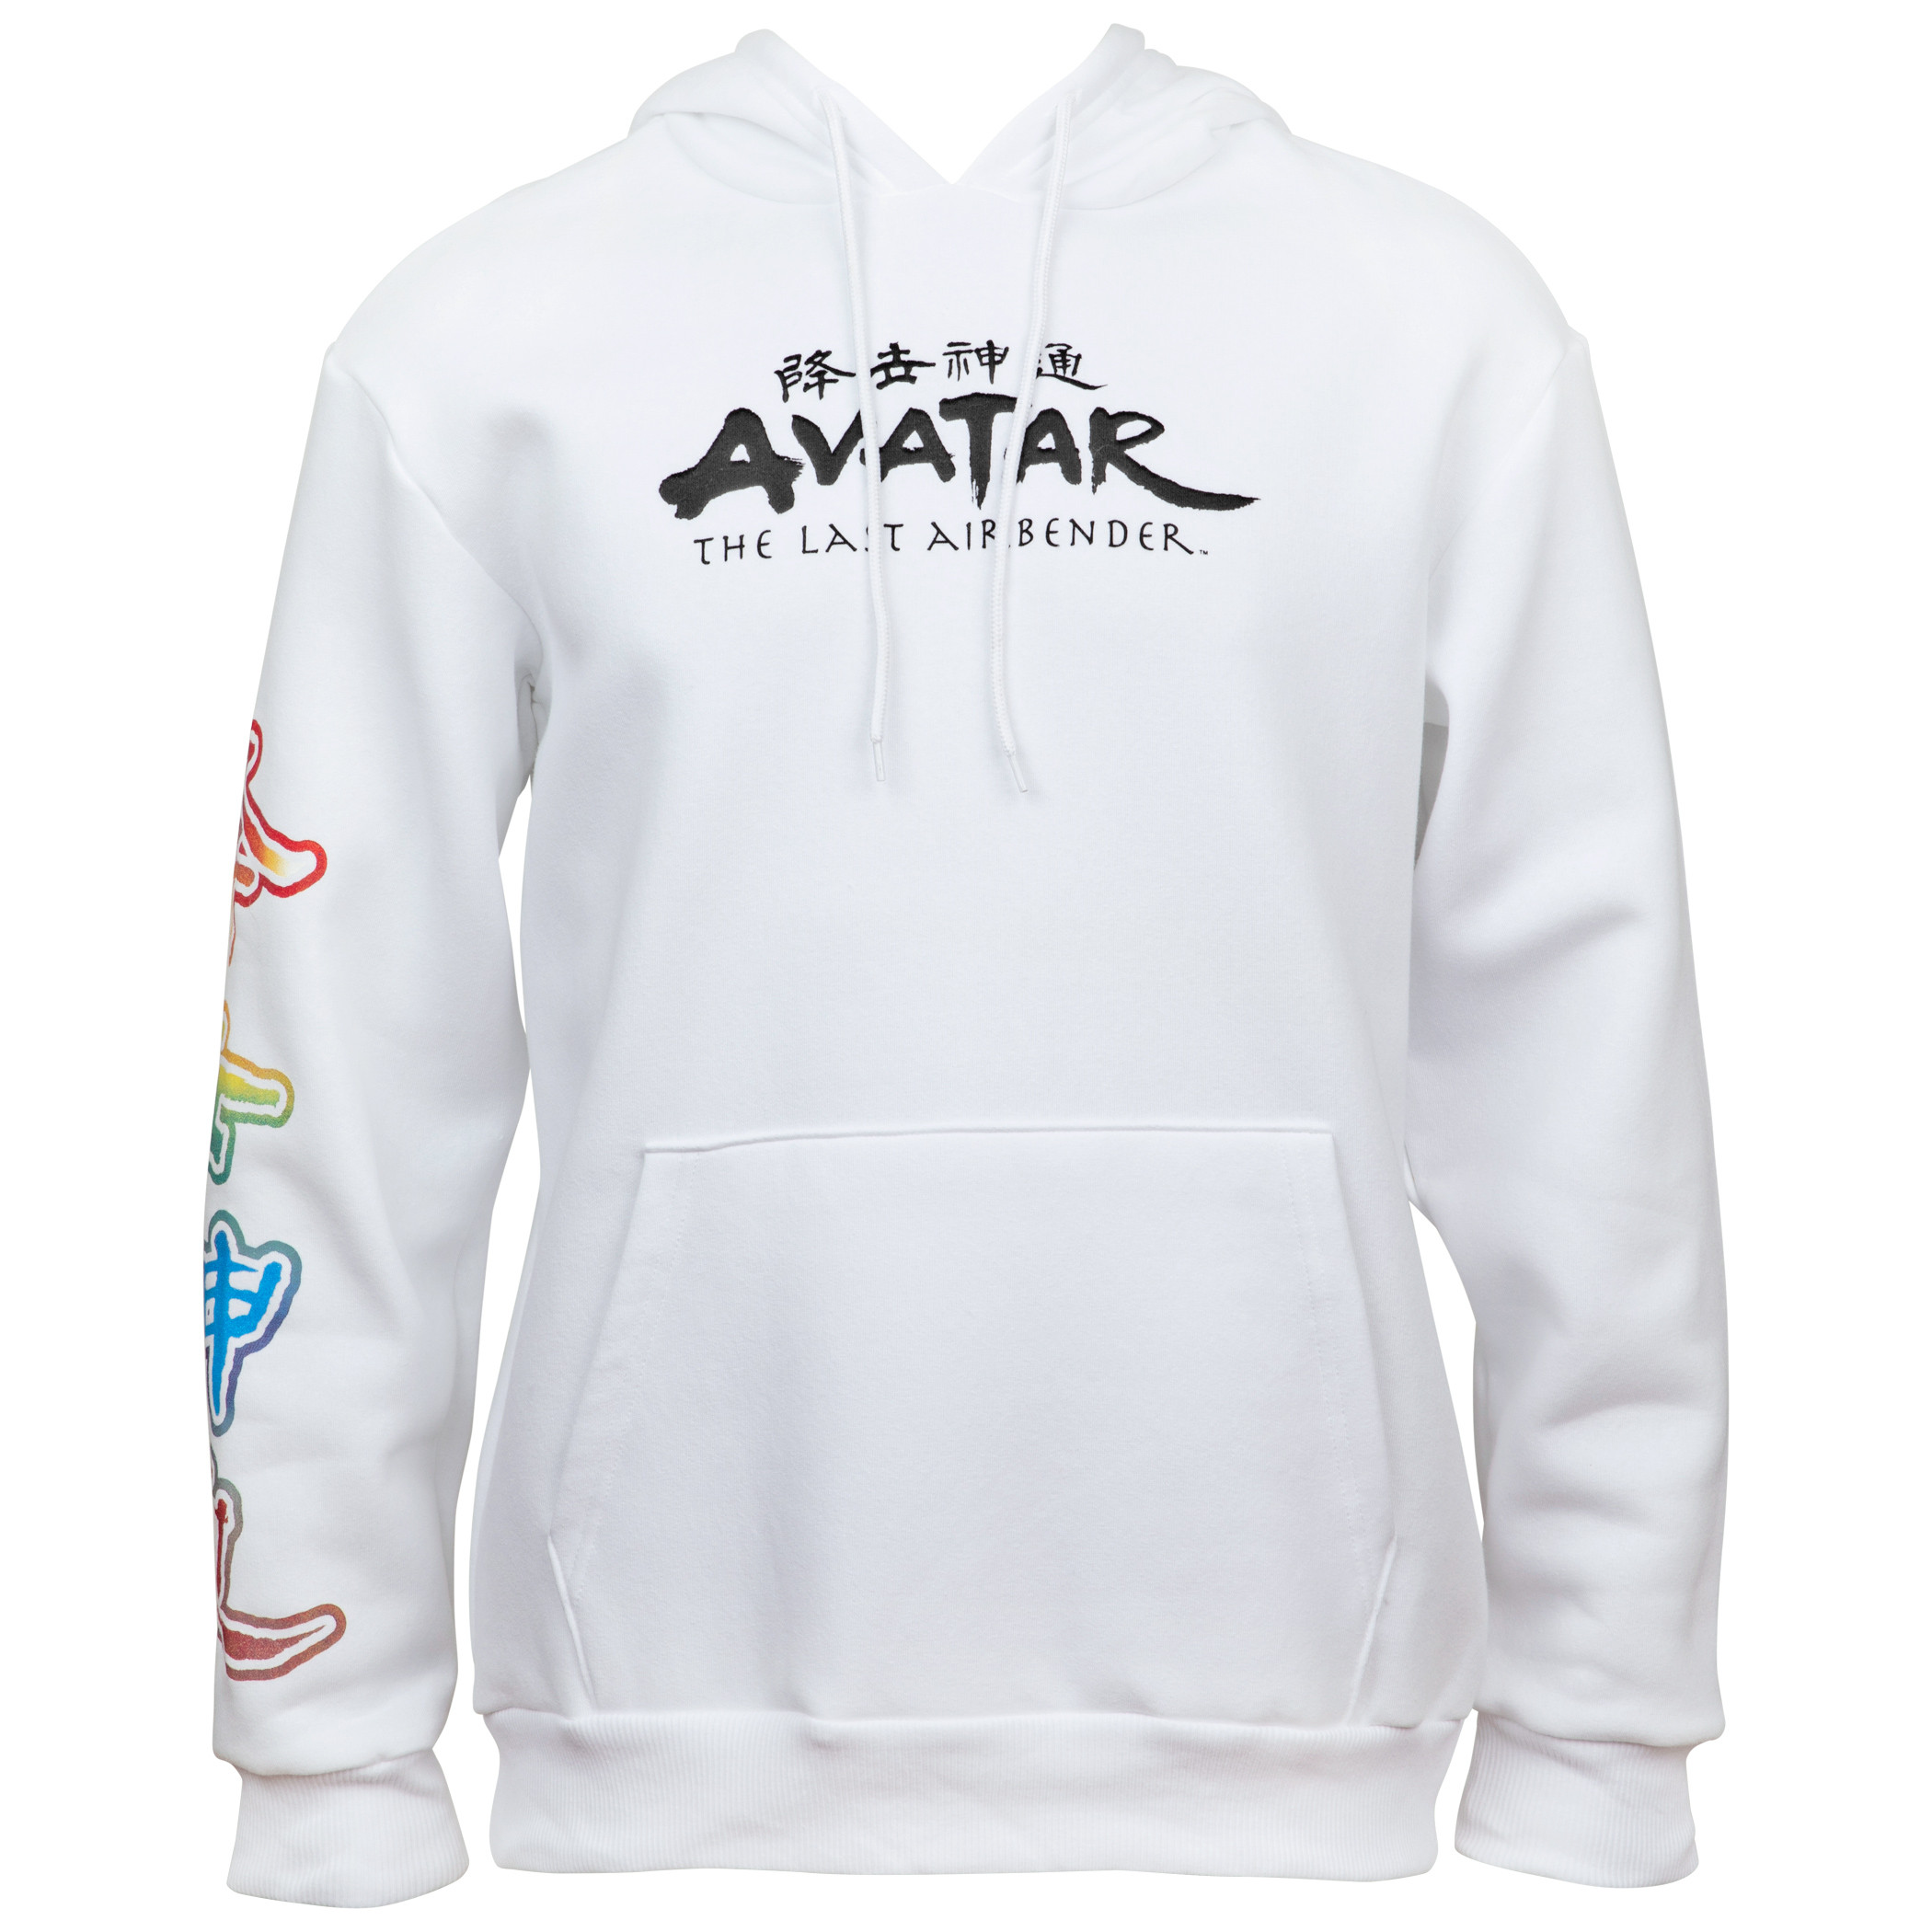 Avatar: The Last Airbender Text Hoodie With Back and Sleeve Prints